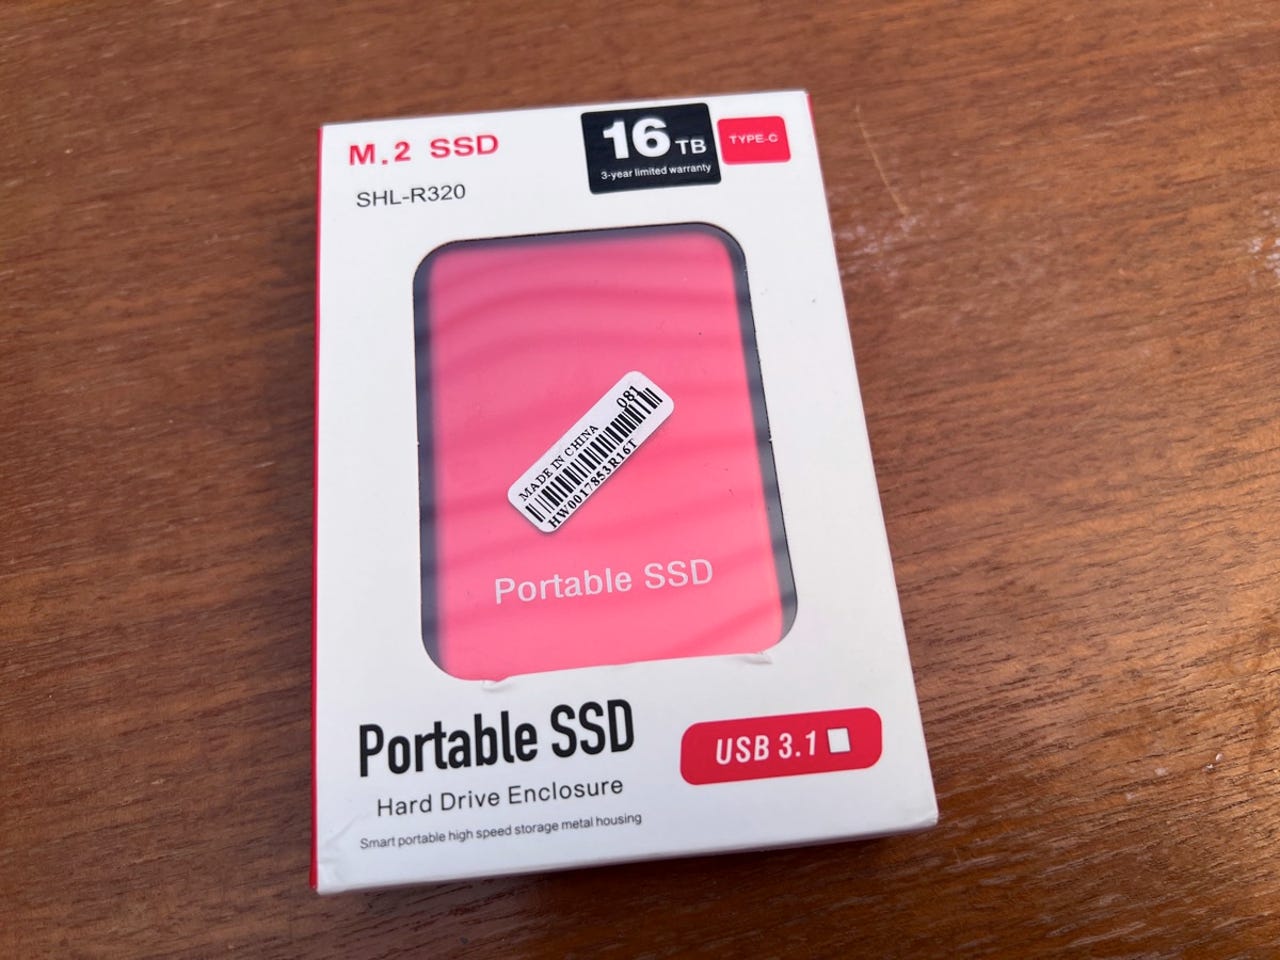 bought a '16TB external M.2 SSD' for $20 and got what I deserved | ZDNET